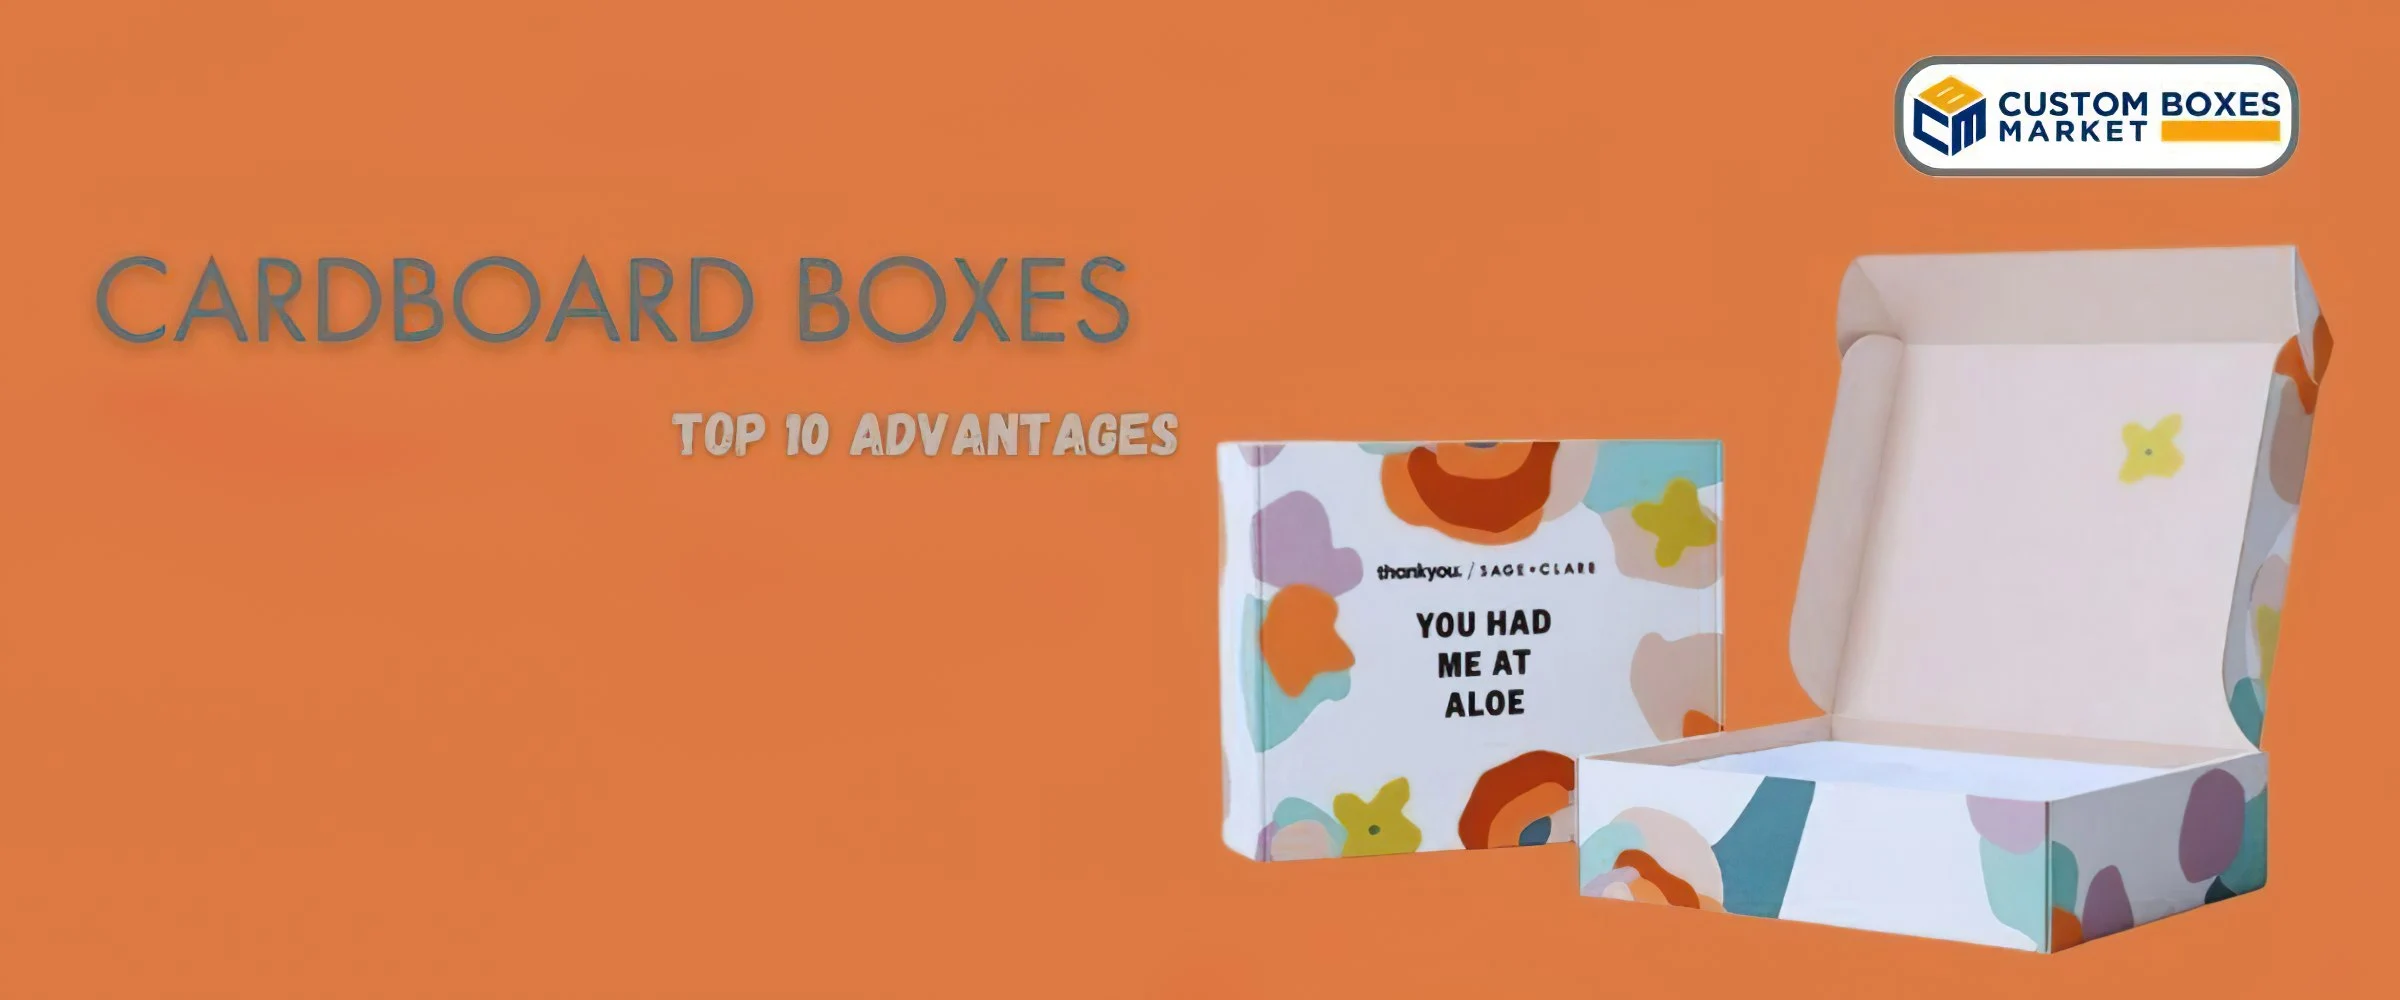 Top 10 Advantages Of Cardboard Boxes